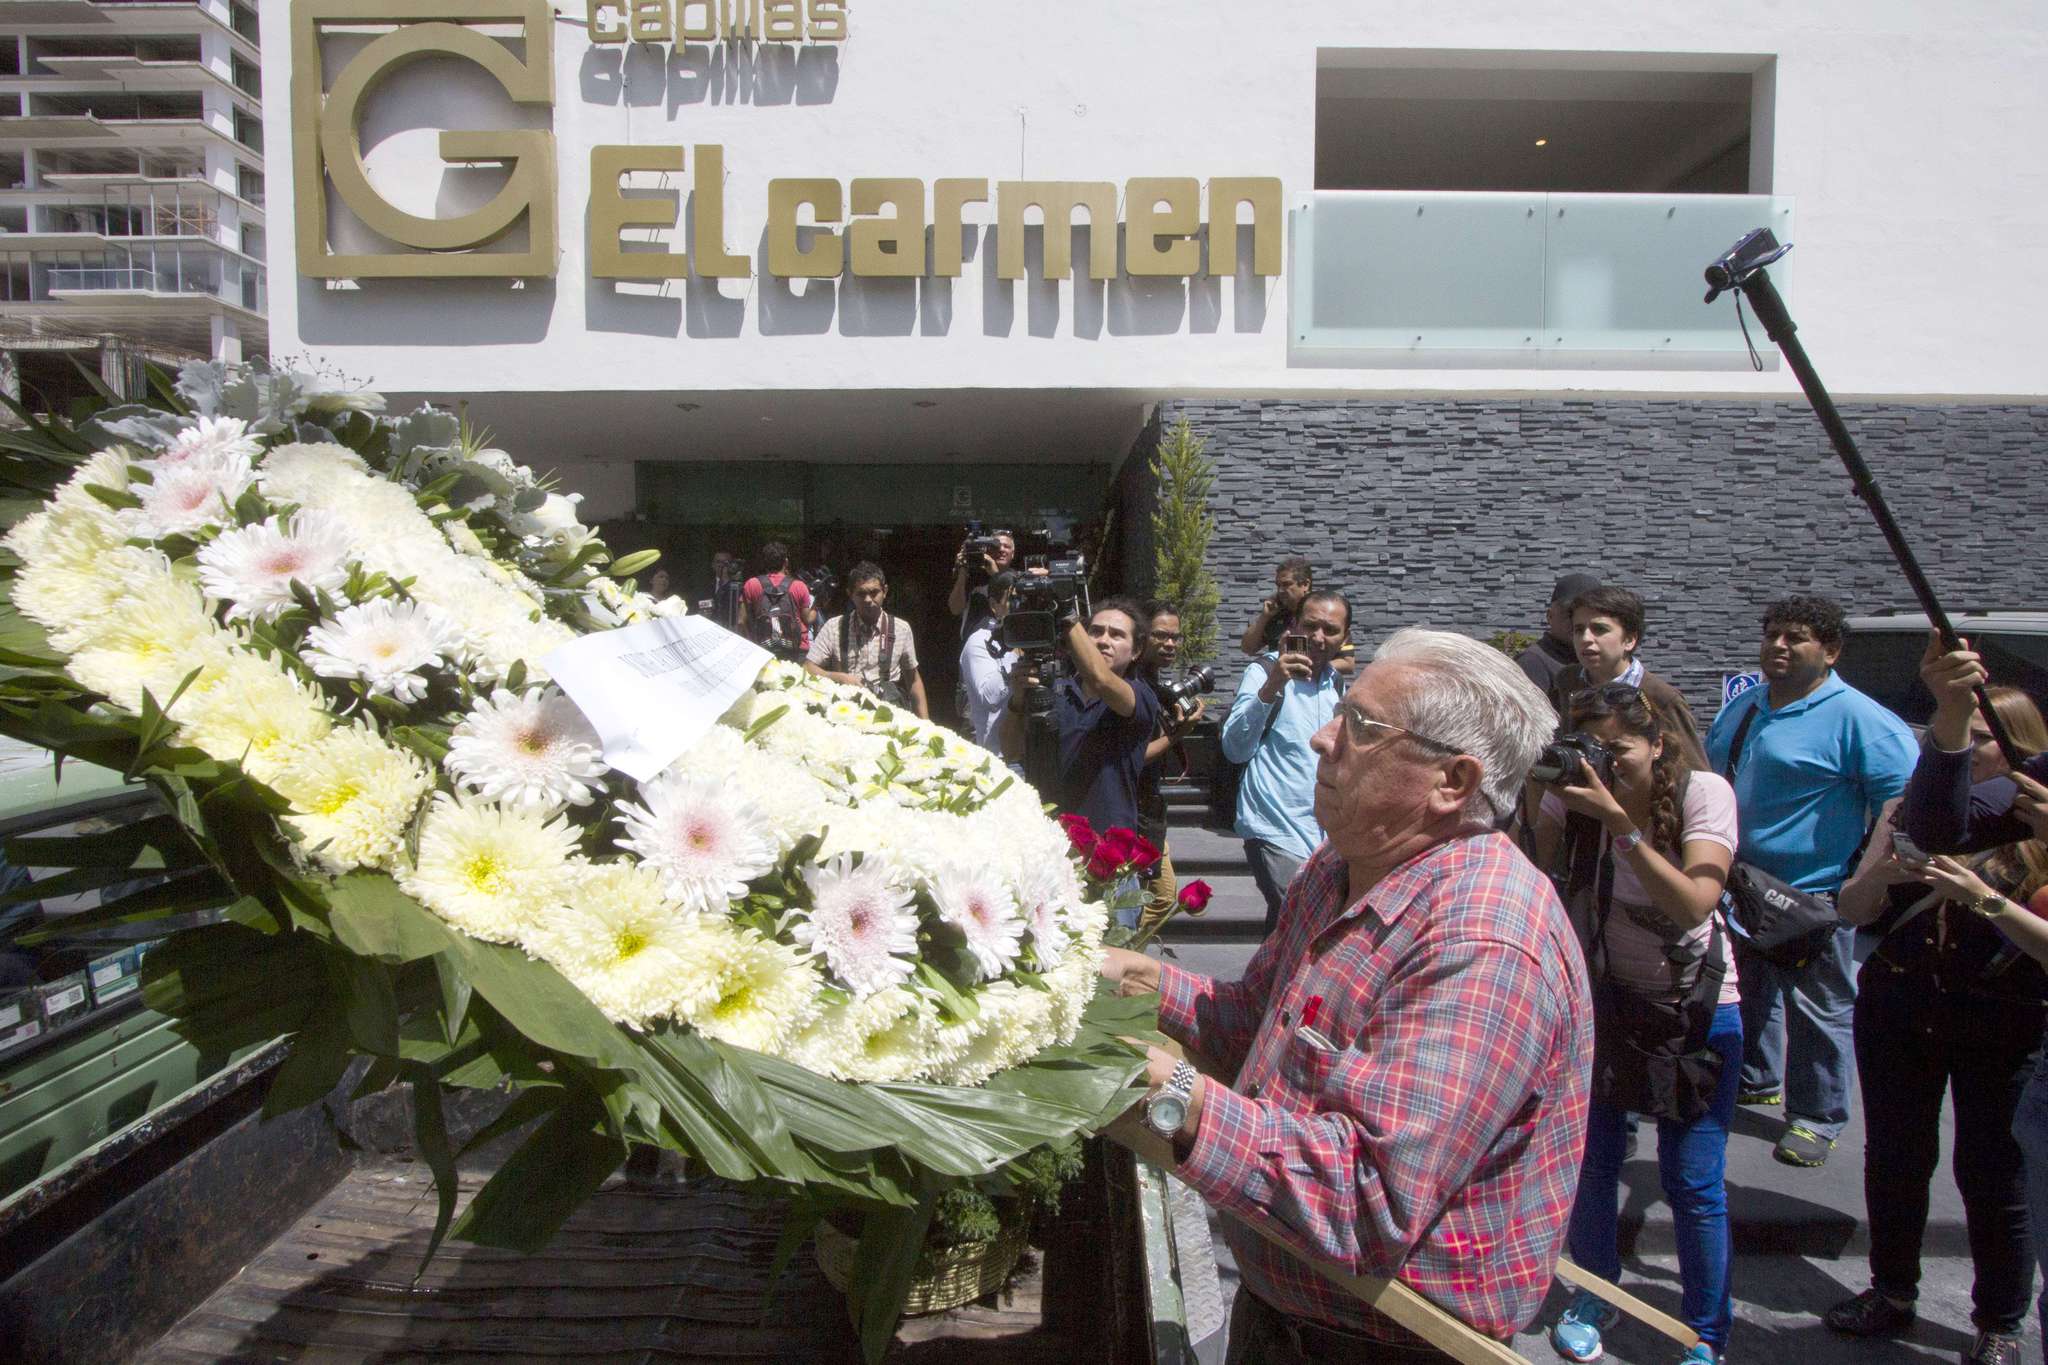 Flowers delivered to the funeral in Guadalajara (AFP/Getty Images)